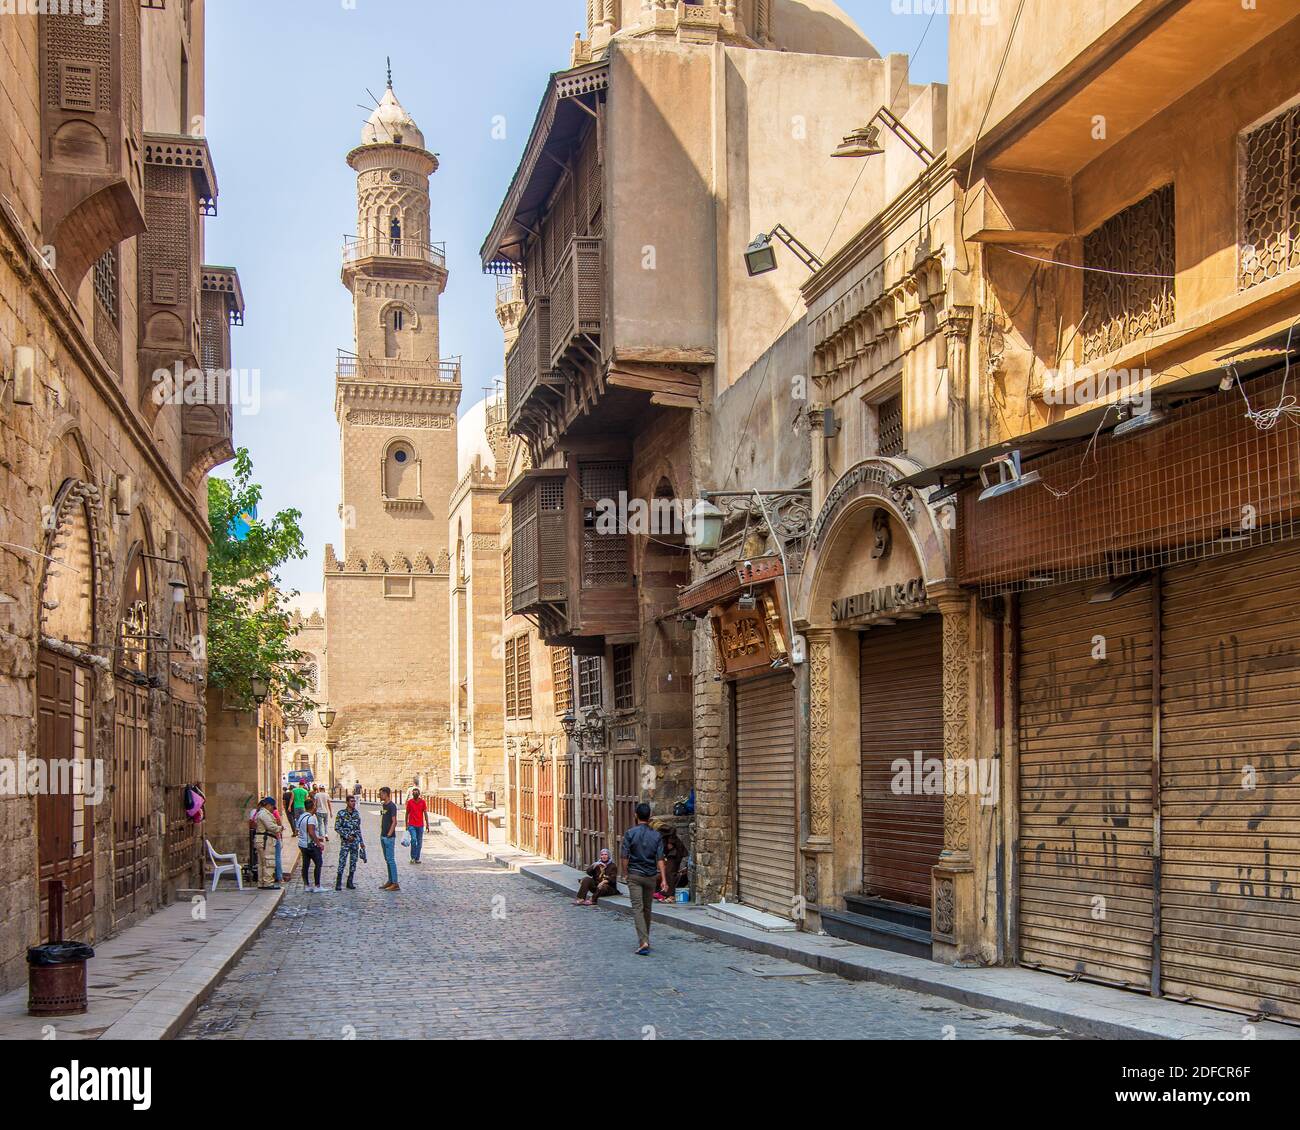 Cairo, Egypt- June 26 2020: Moez Street with workers, few local visitors and minaret of Qalawun Complex historic building, during Covid-19 lockdown period, Gamalia district, Old Cairo Stock Photo